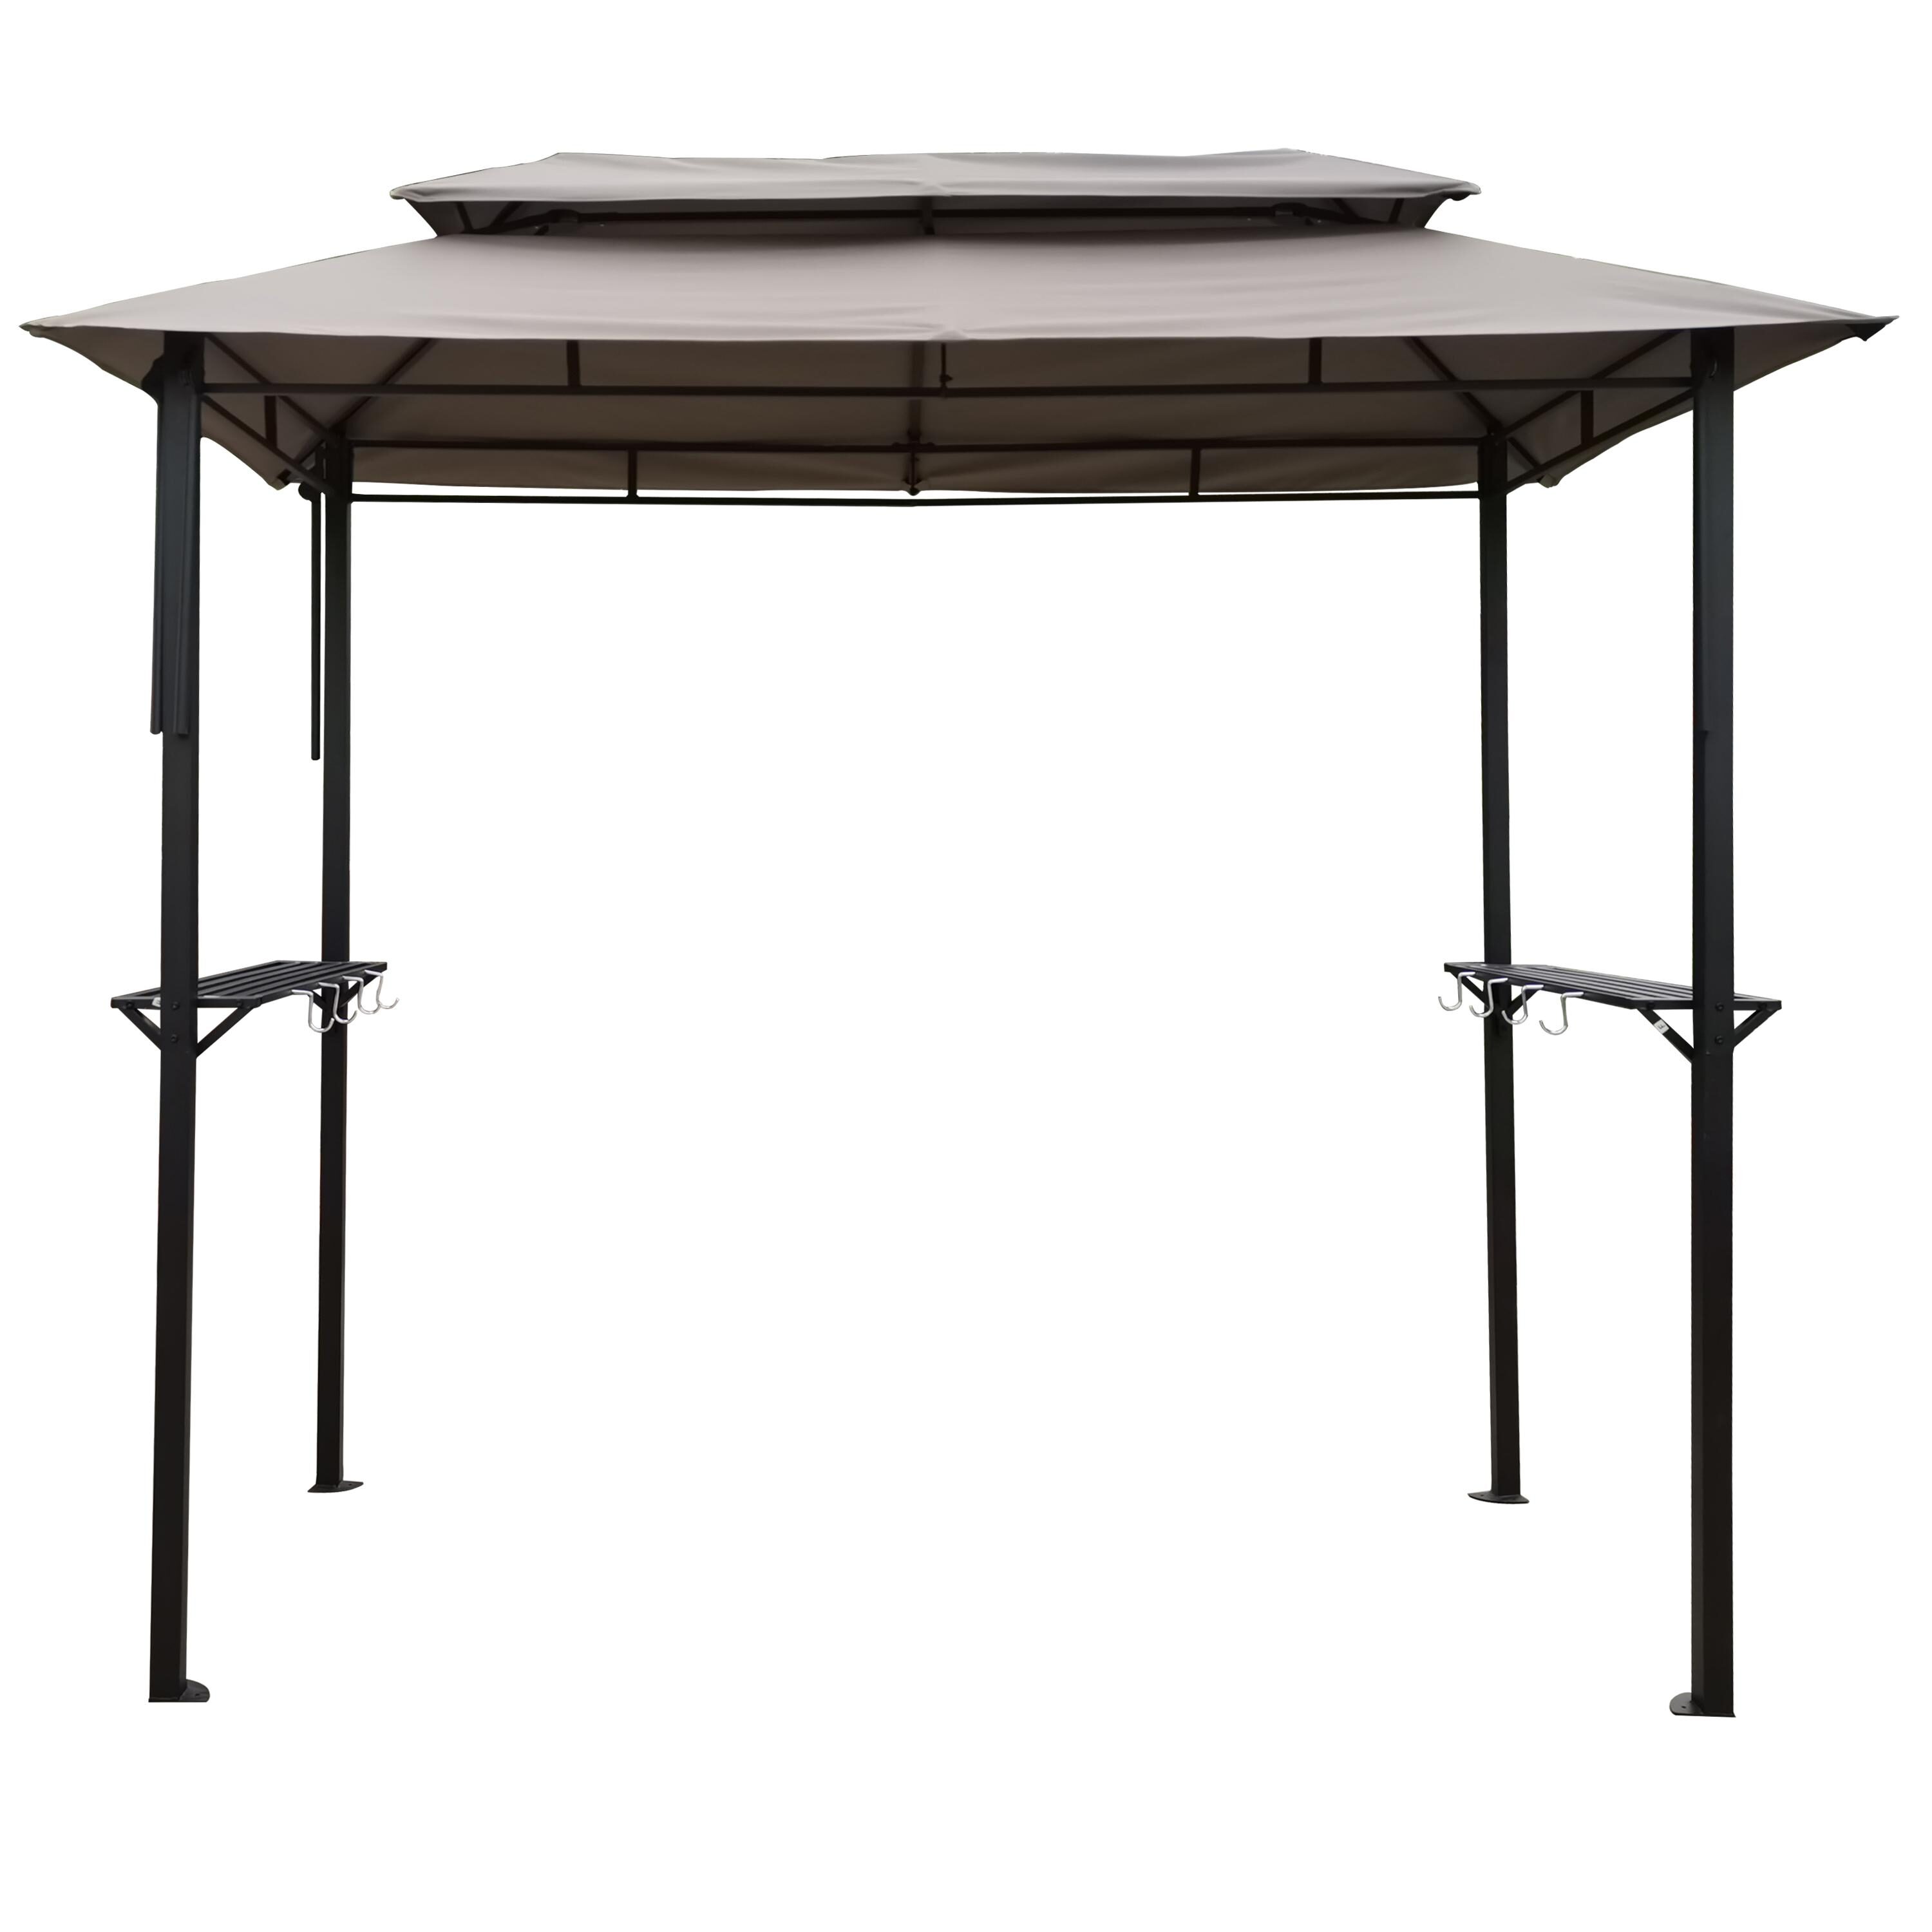 Bayfeve 8-ft 4-ft Outdoor Grill Gazebo Metal Rectangle Grill Gazebo in Gazebos department at Lowes.com